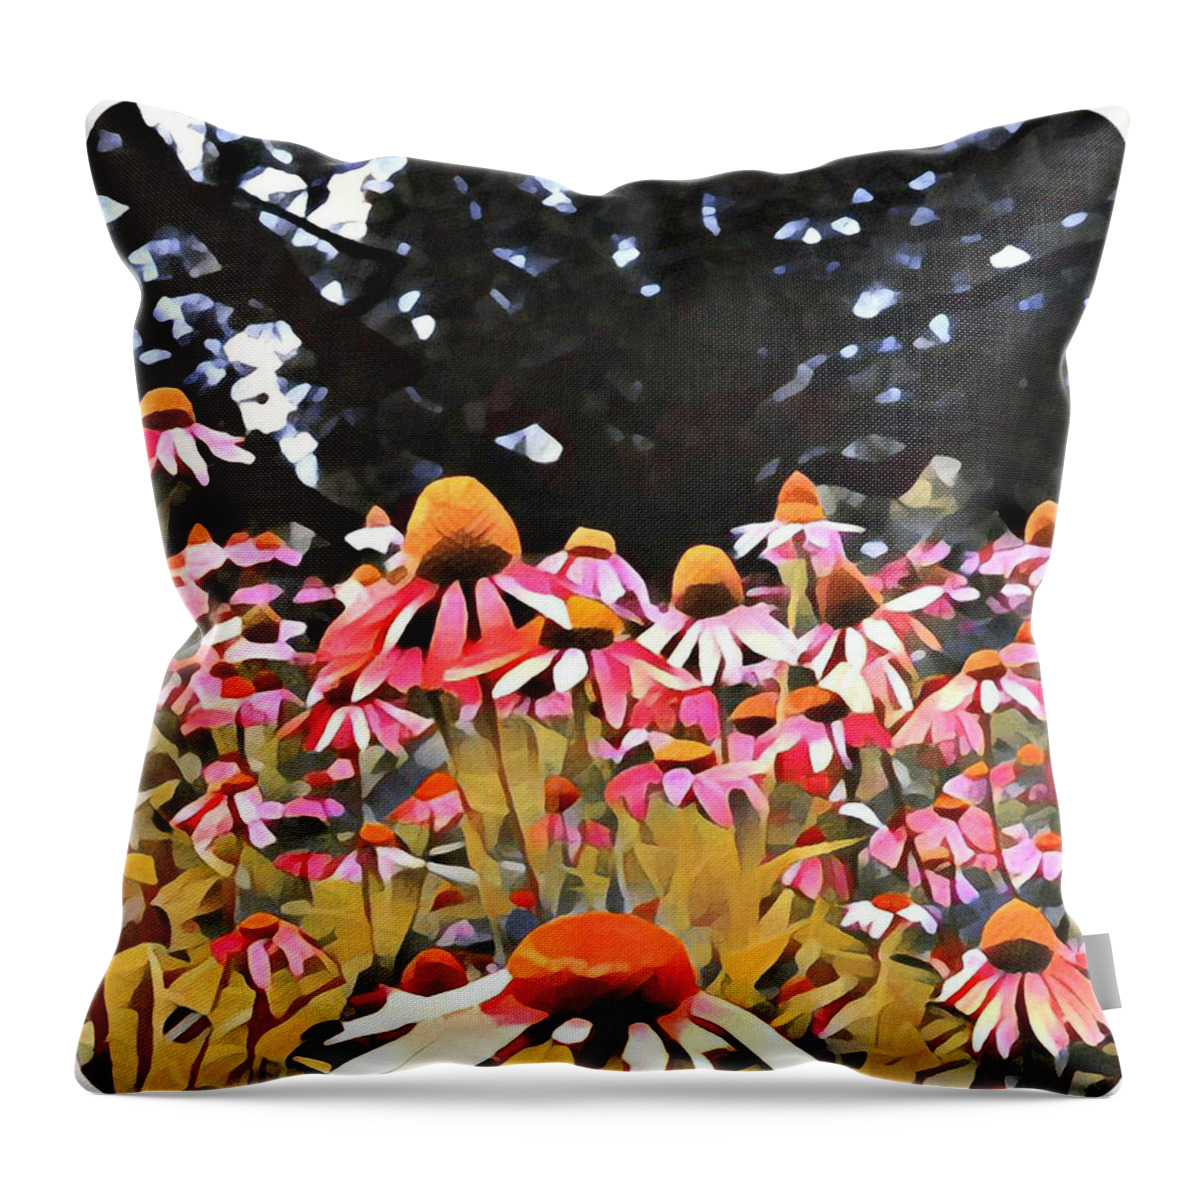 Flowers Throw Pillow featuring the photograph Sydney Botanical Garden by Unhinged Artistry